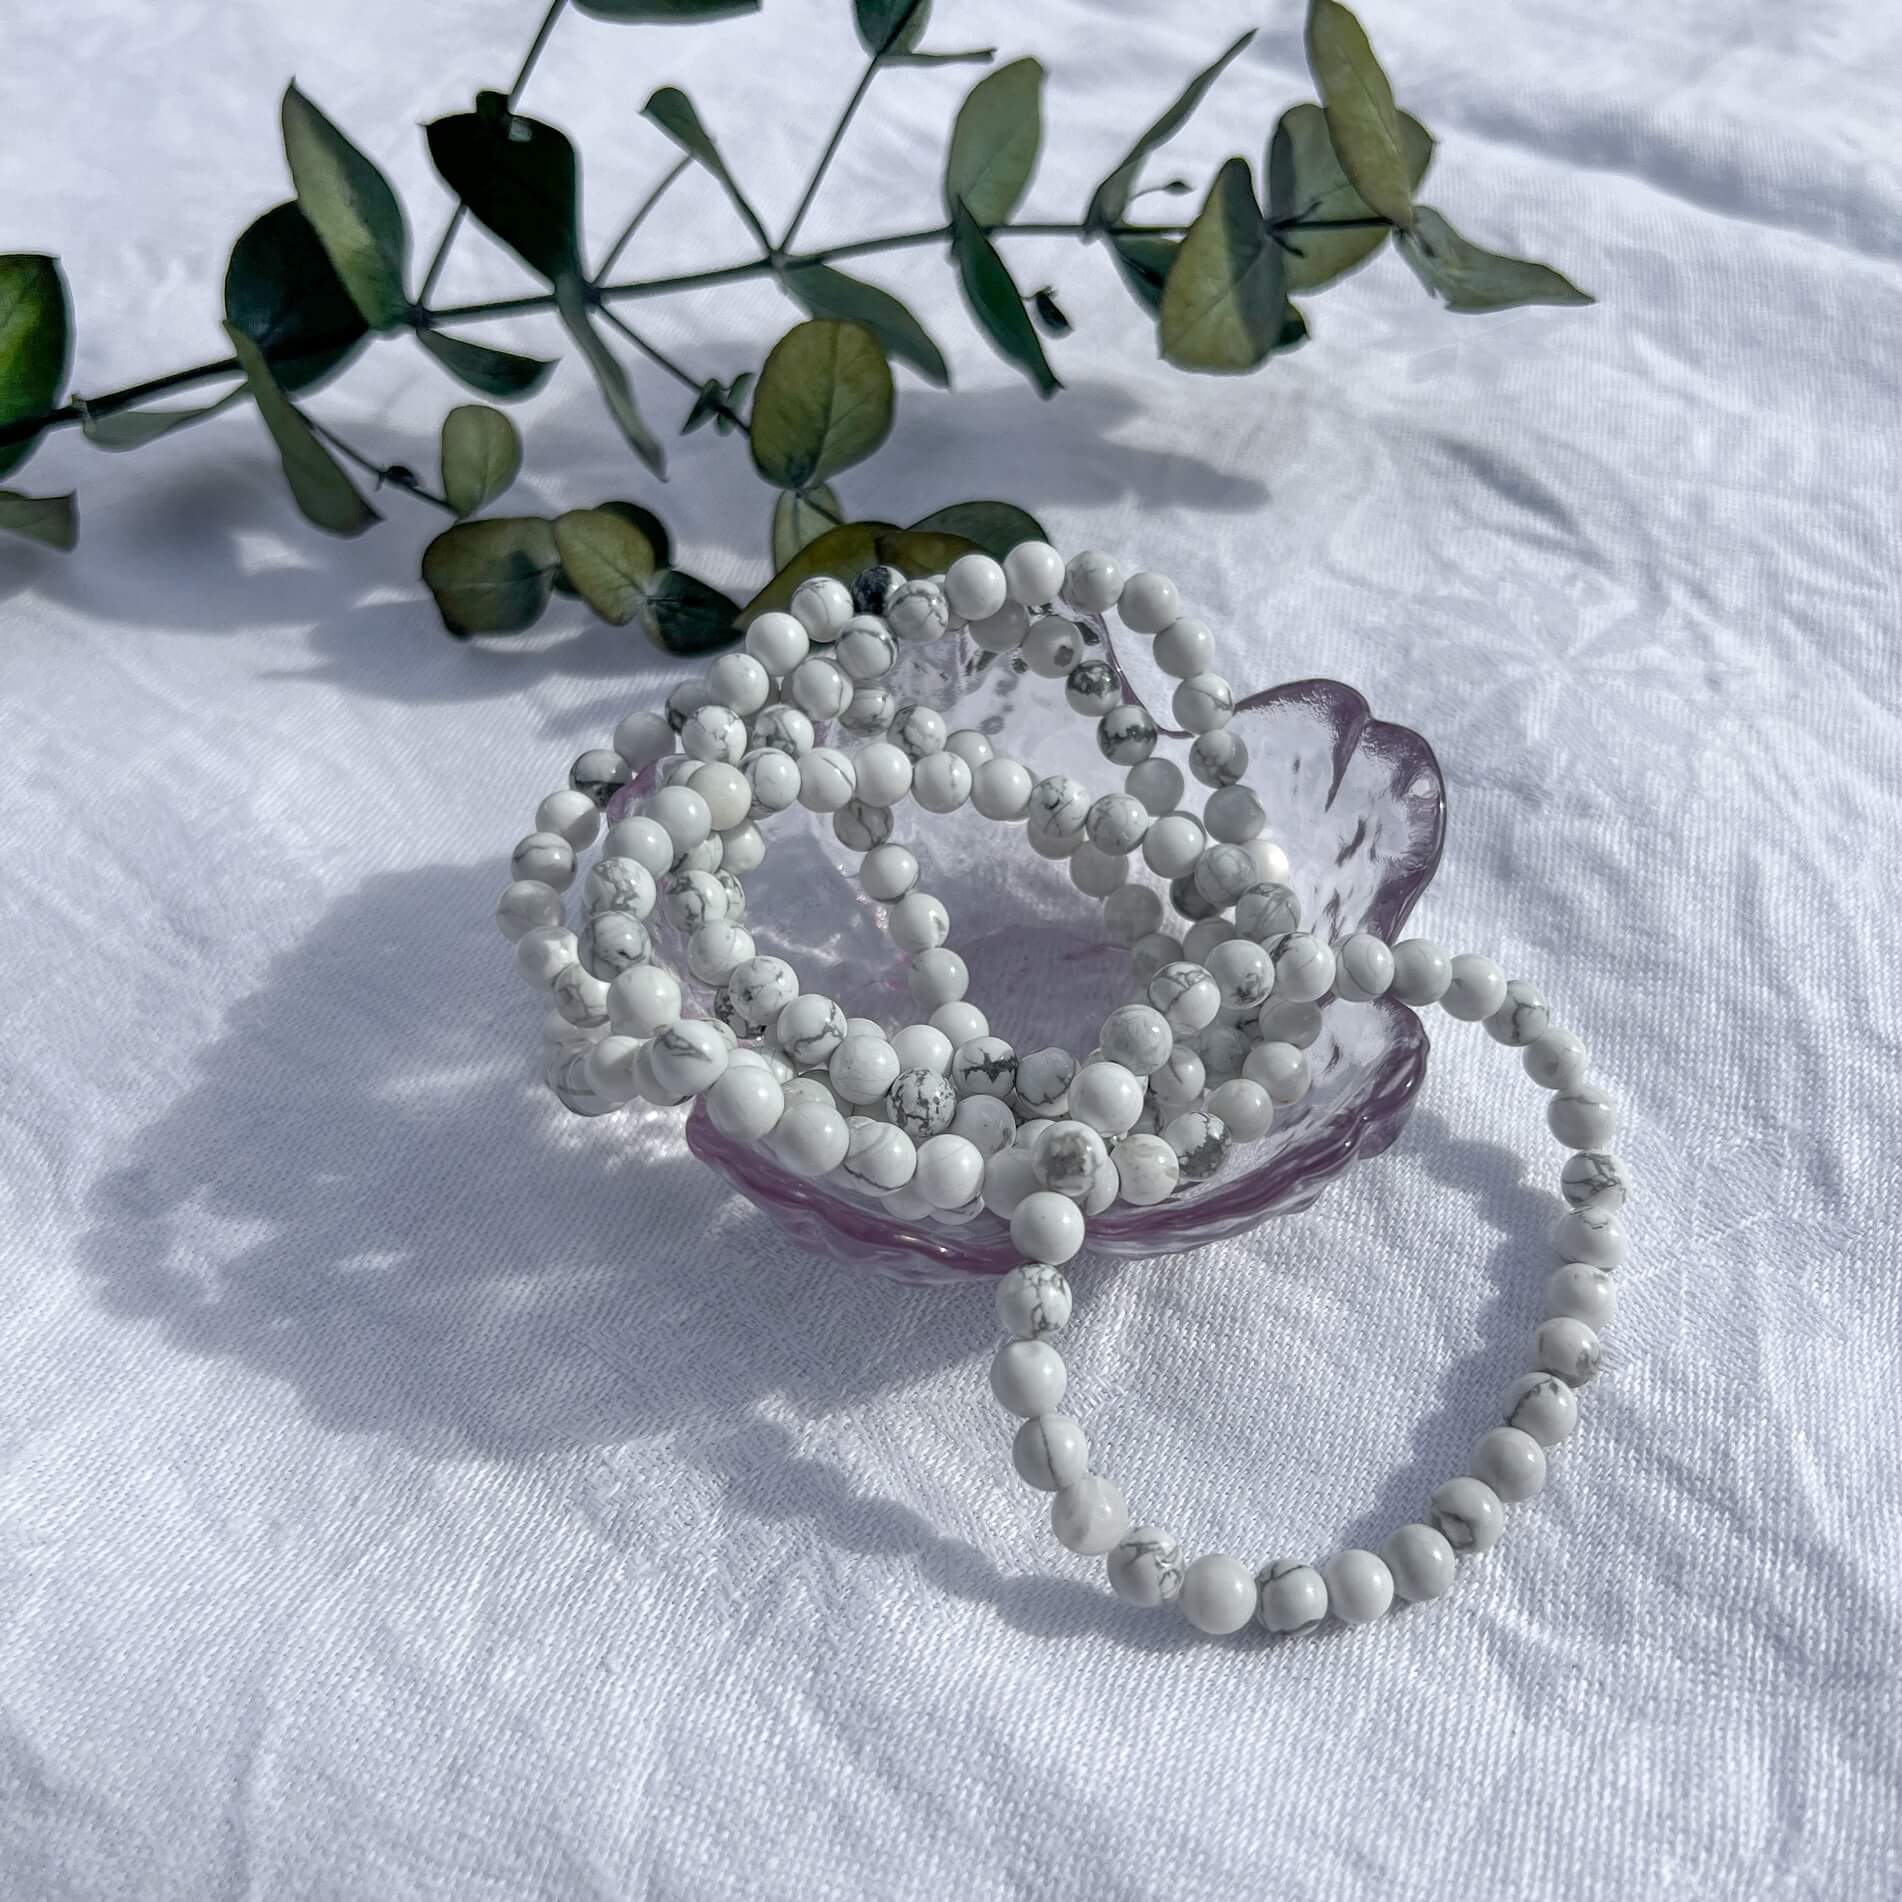 A glass trinket dish filled with white and grey marbled Howlite healing crystal bead bracelets